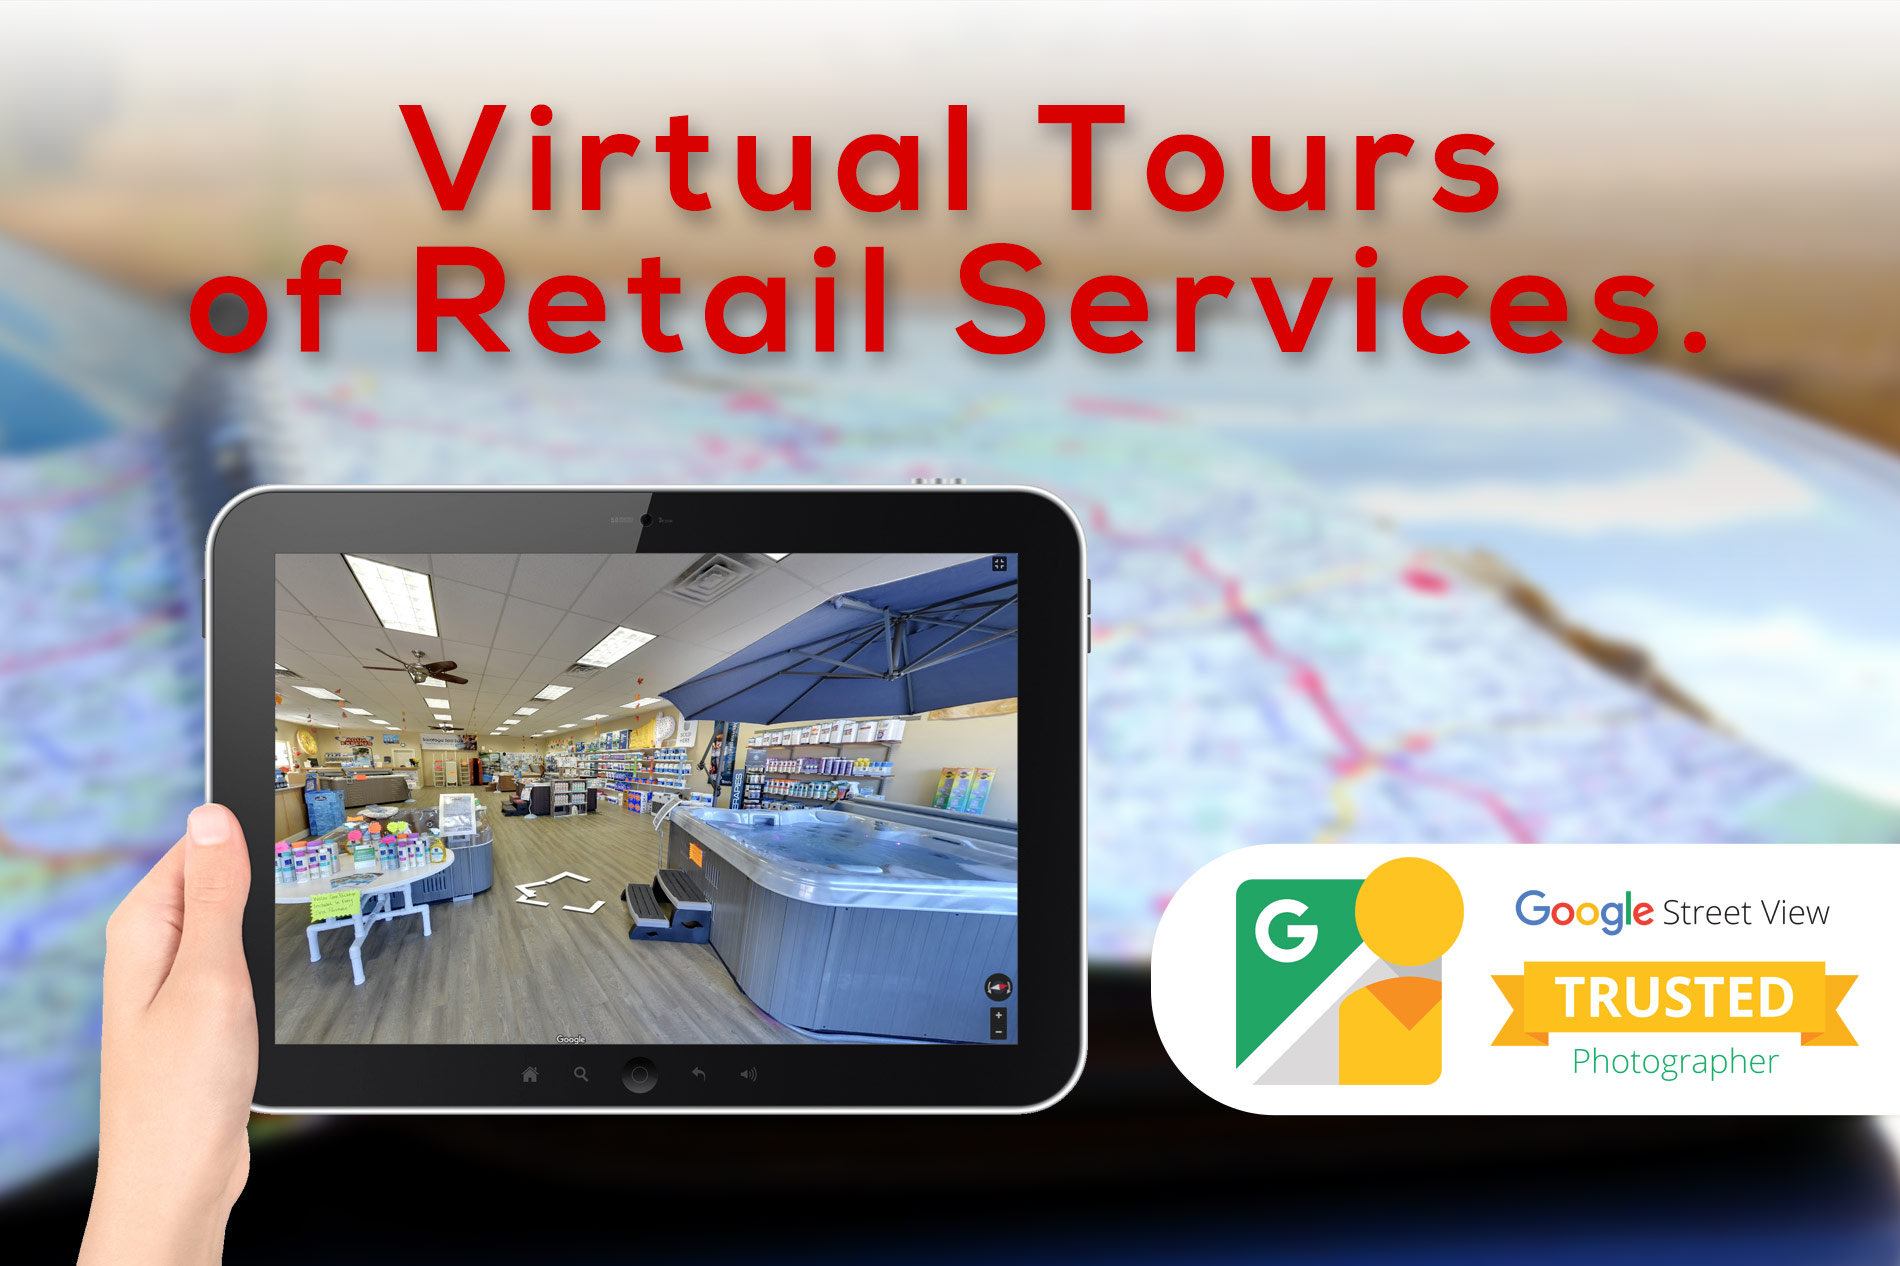 Virtual-Tours-of-Retail-Services Services - Make it Active, LLC - Results from #42